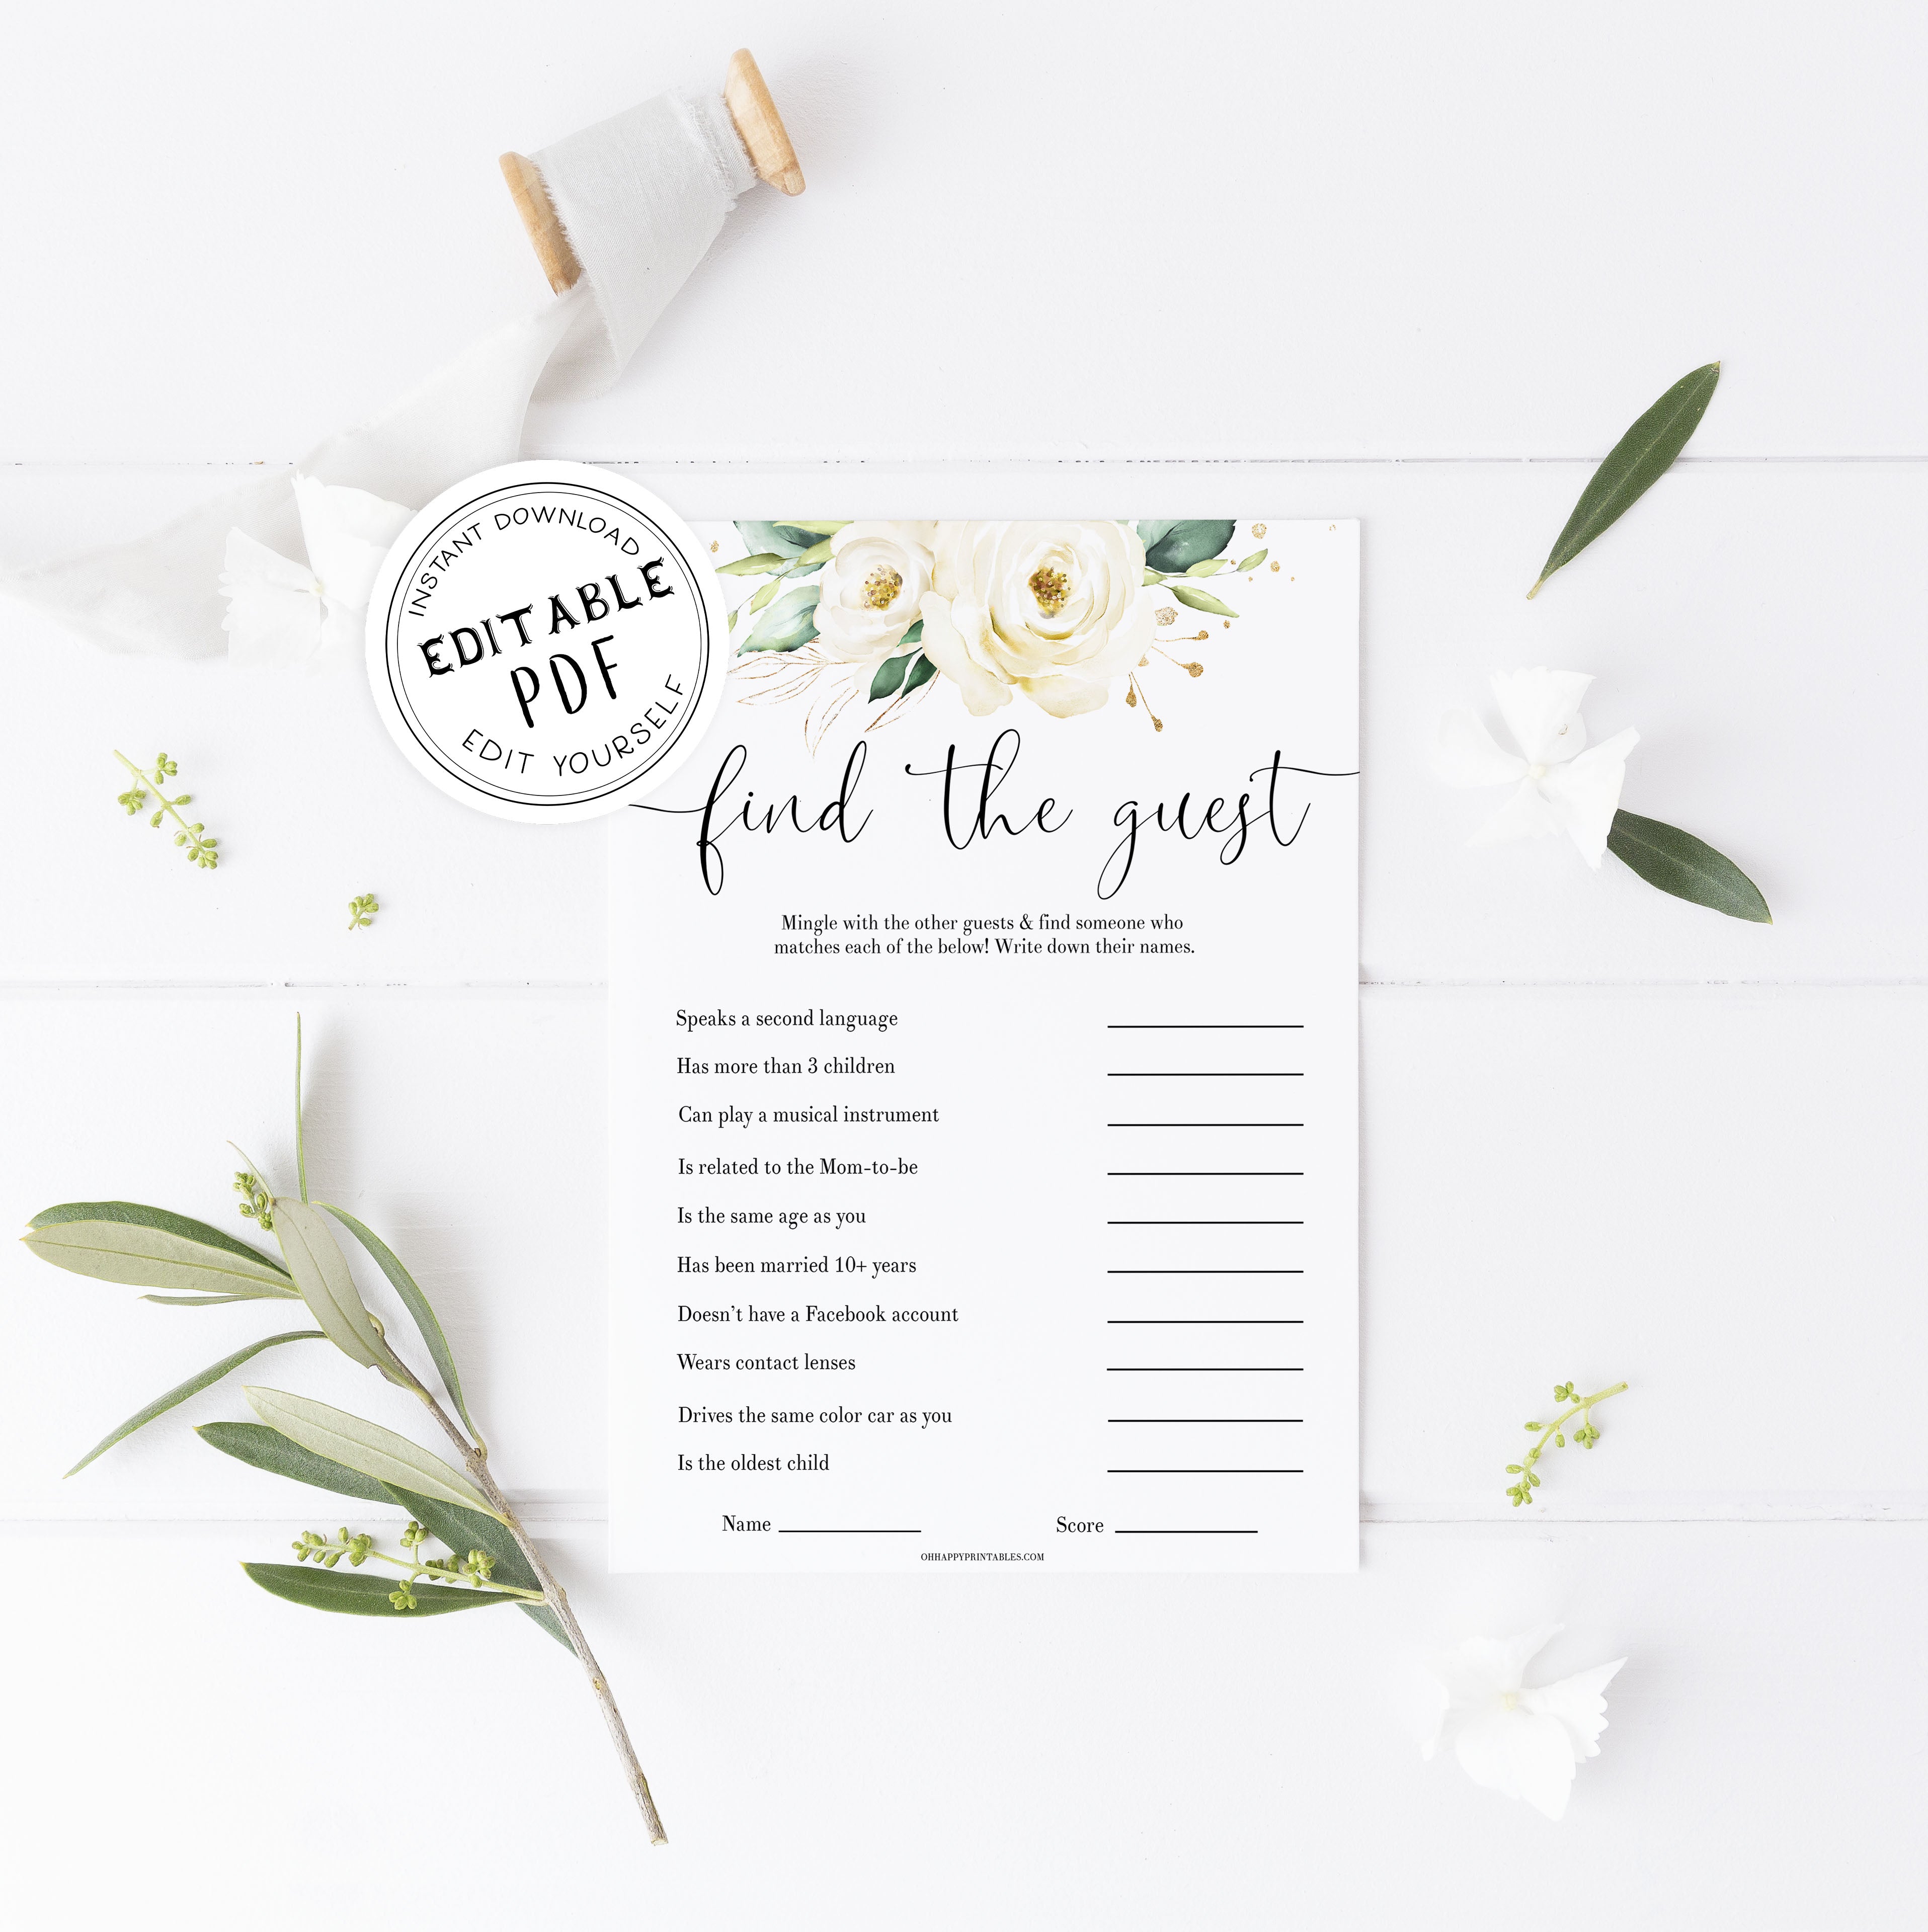 Editable Find the guest baby game, Printable baby shower games, shite floral baby games, baby shower games, fun baby shower ideas, top baby shower ideas, floral baby shower, baby shower games, fun floral baby shower ideas